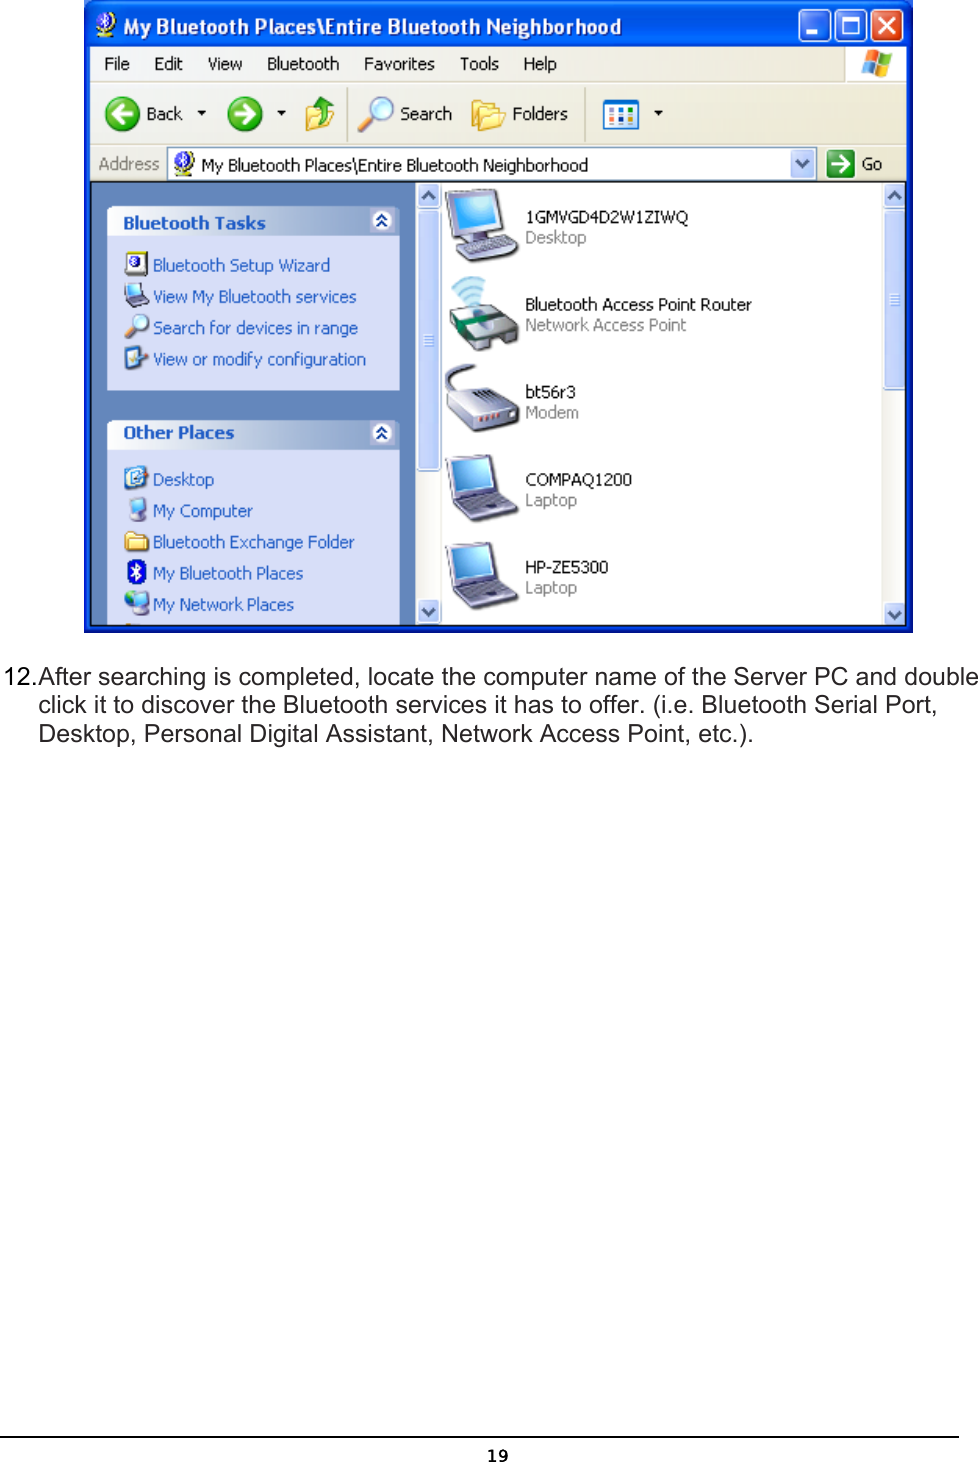   19 12. After searching is completed, locate the computer name of the Server PC and double click it to discover the Bluetooth services it has to offer. (i.e. Bluetooth Serial Port, Desktop, Personal Digital Assistant, Network Access Point, etc.). 